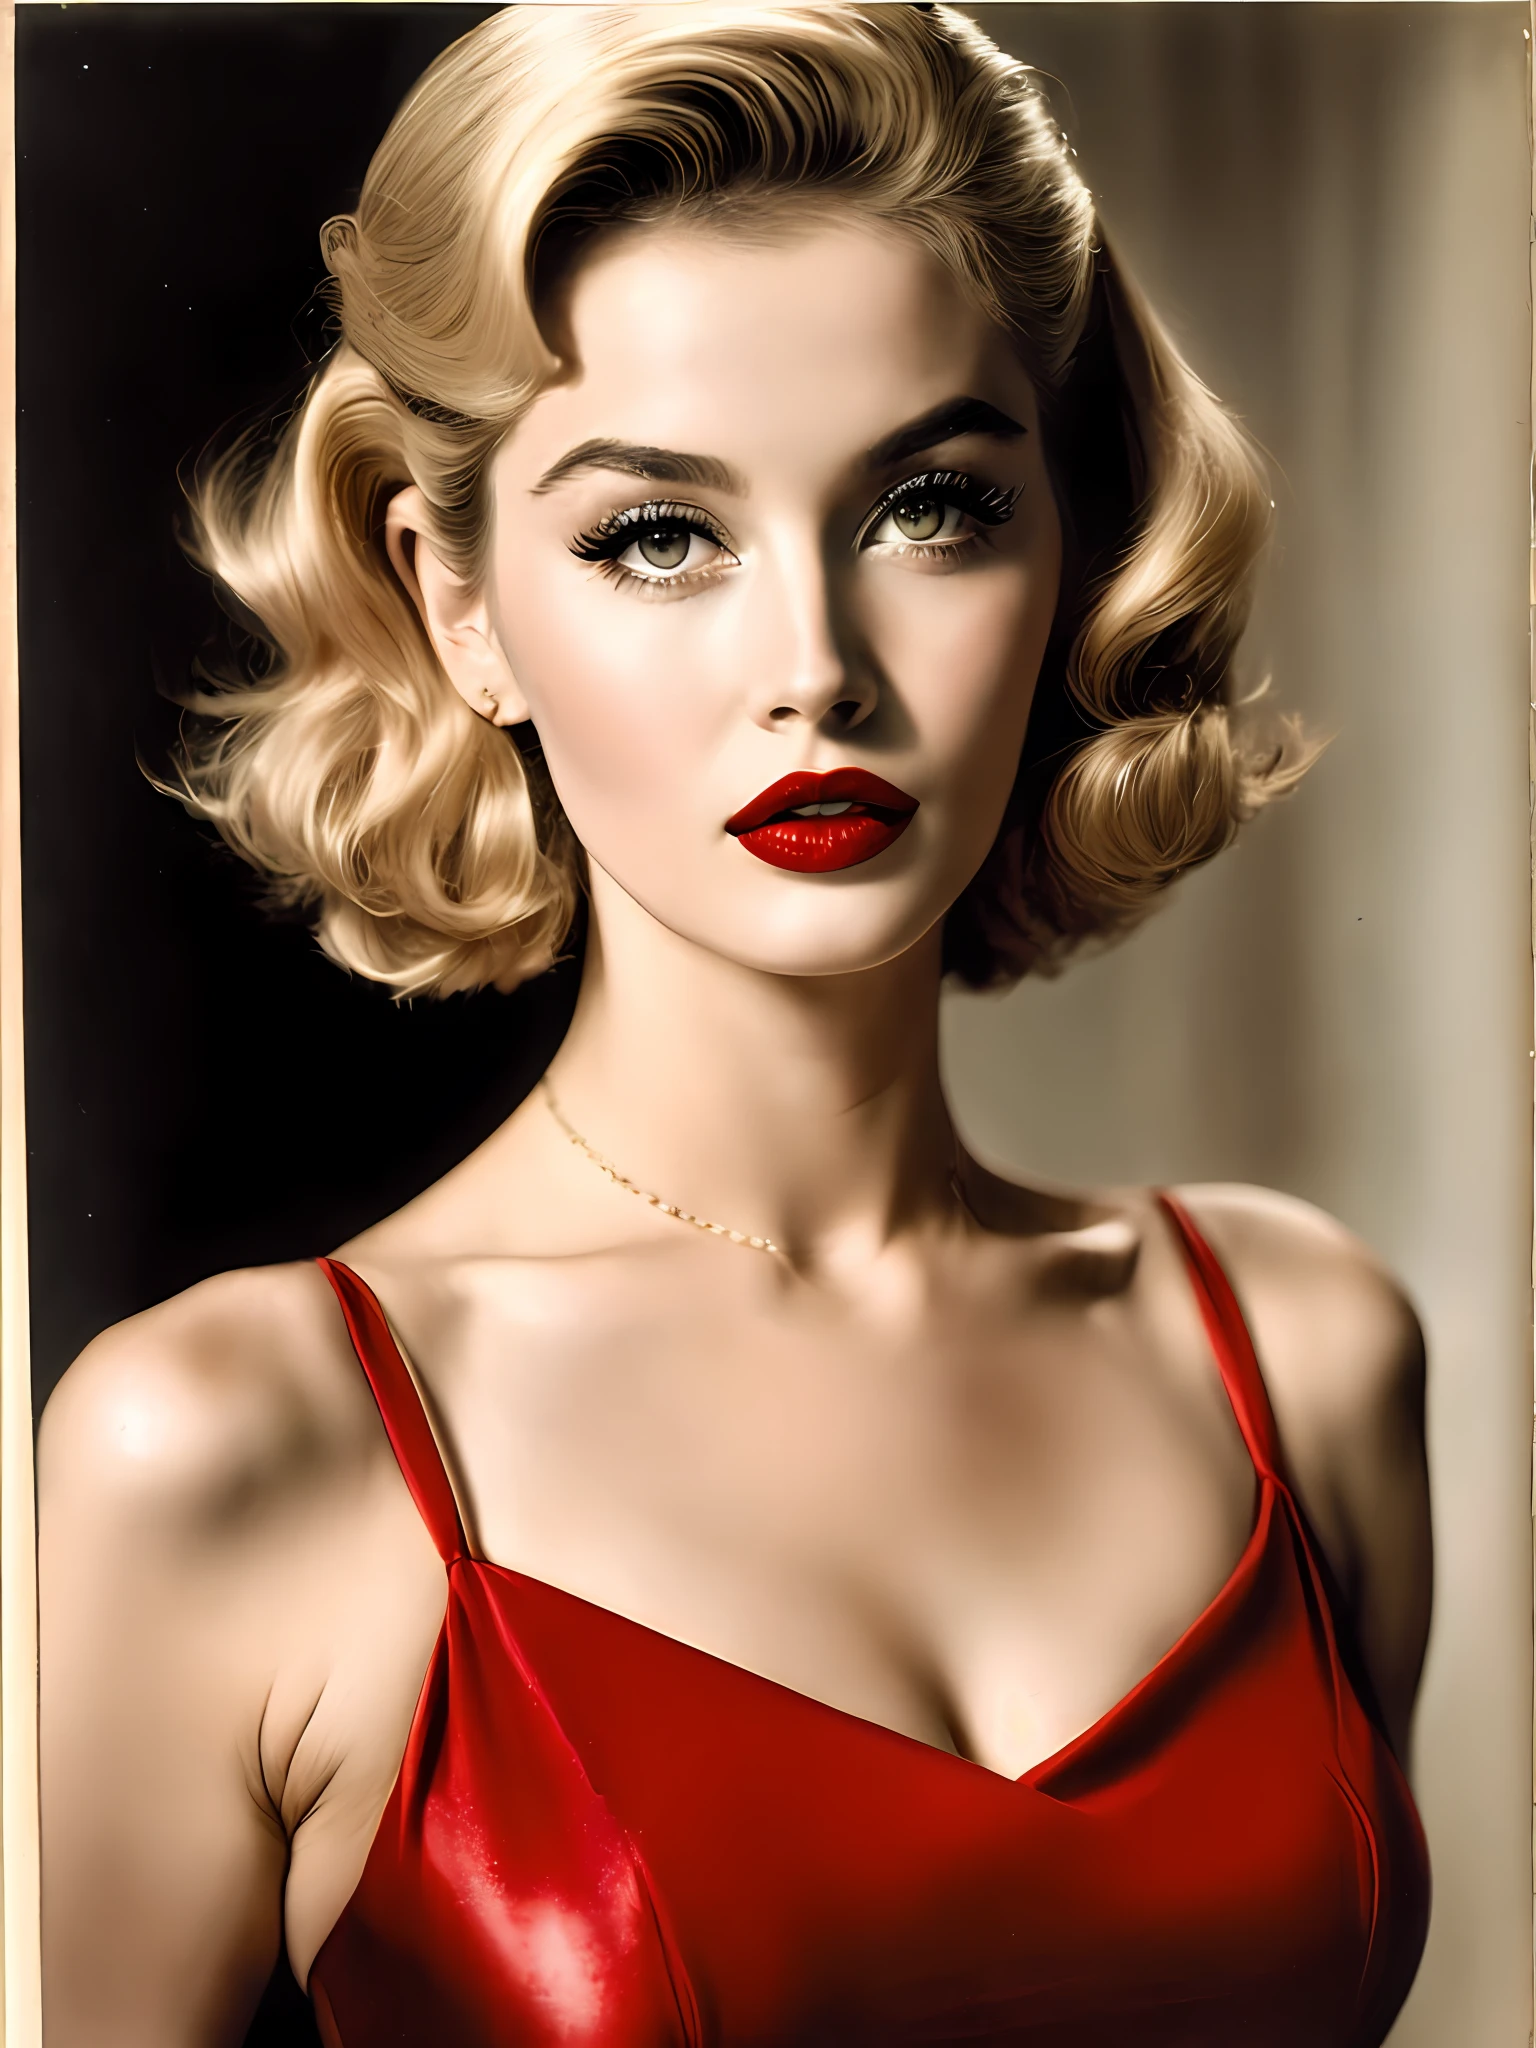 1950s blonde bombshell with pouty lips and sultry eyes. she wears a red lipstick and a tight-fitting dress, exuding confidence and sensuality 8k